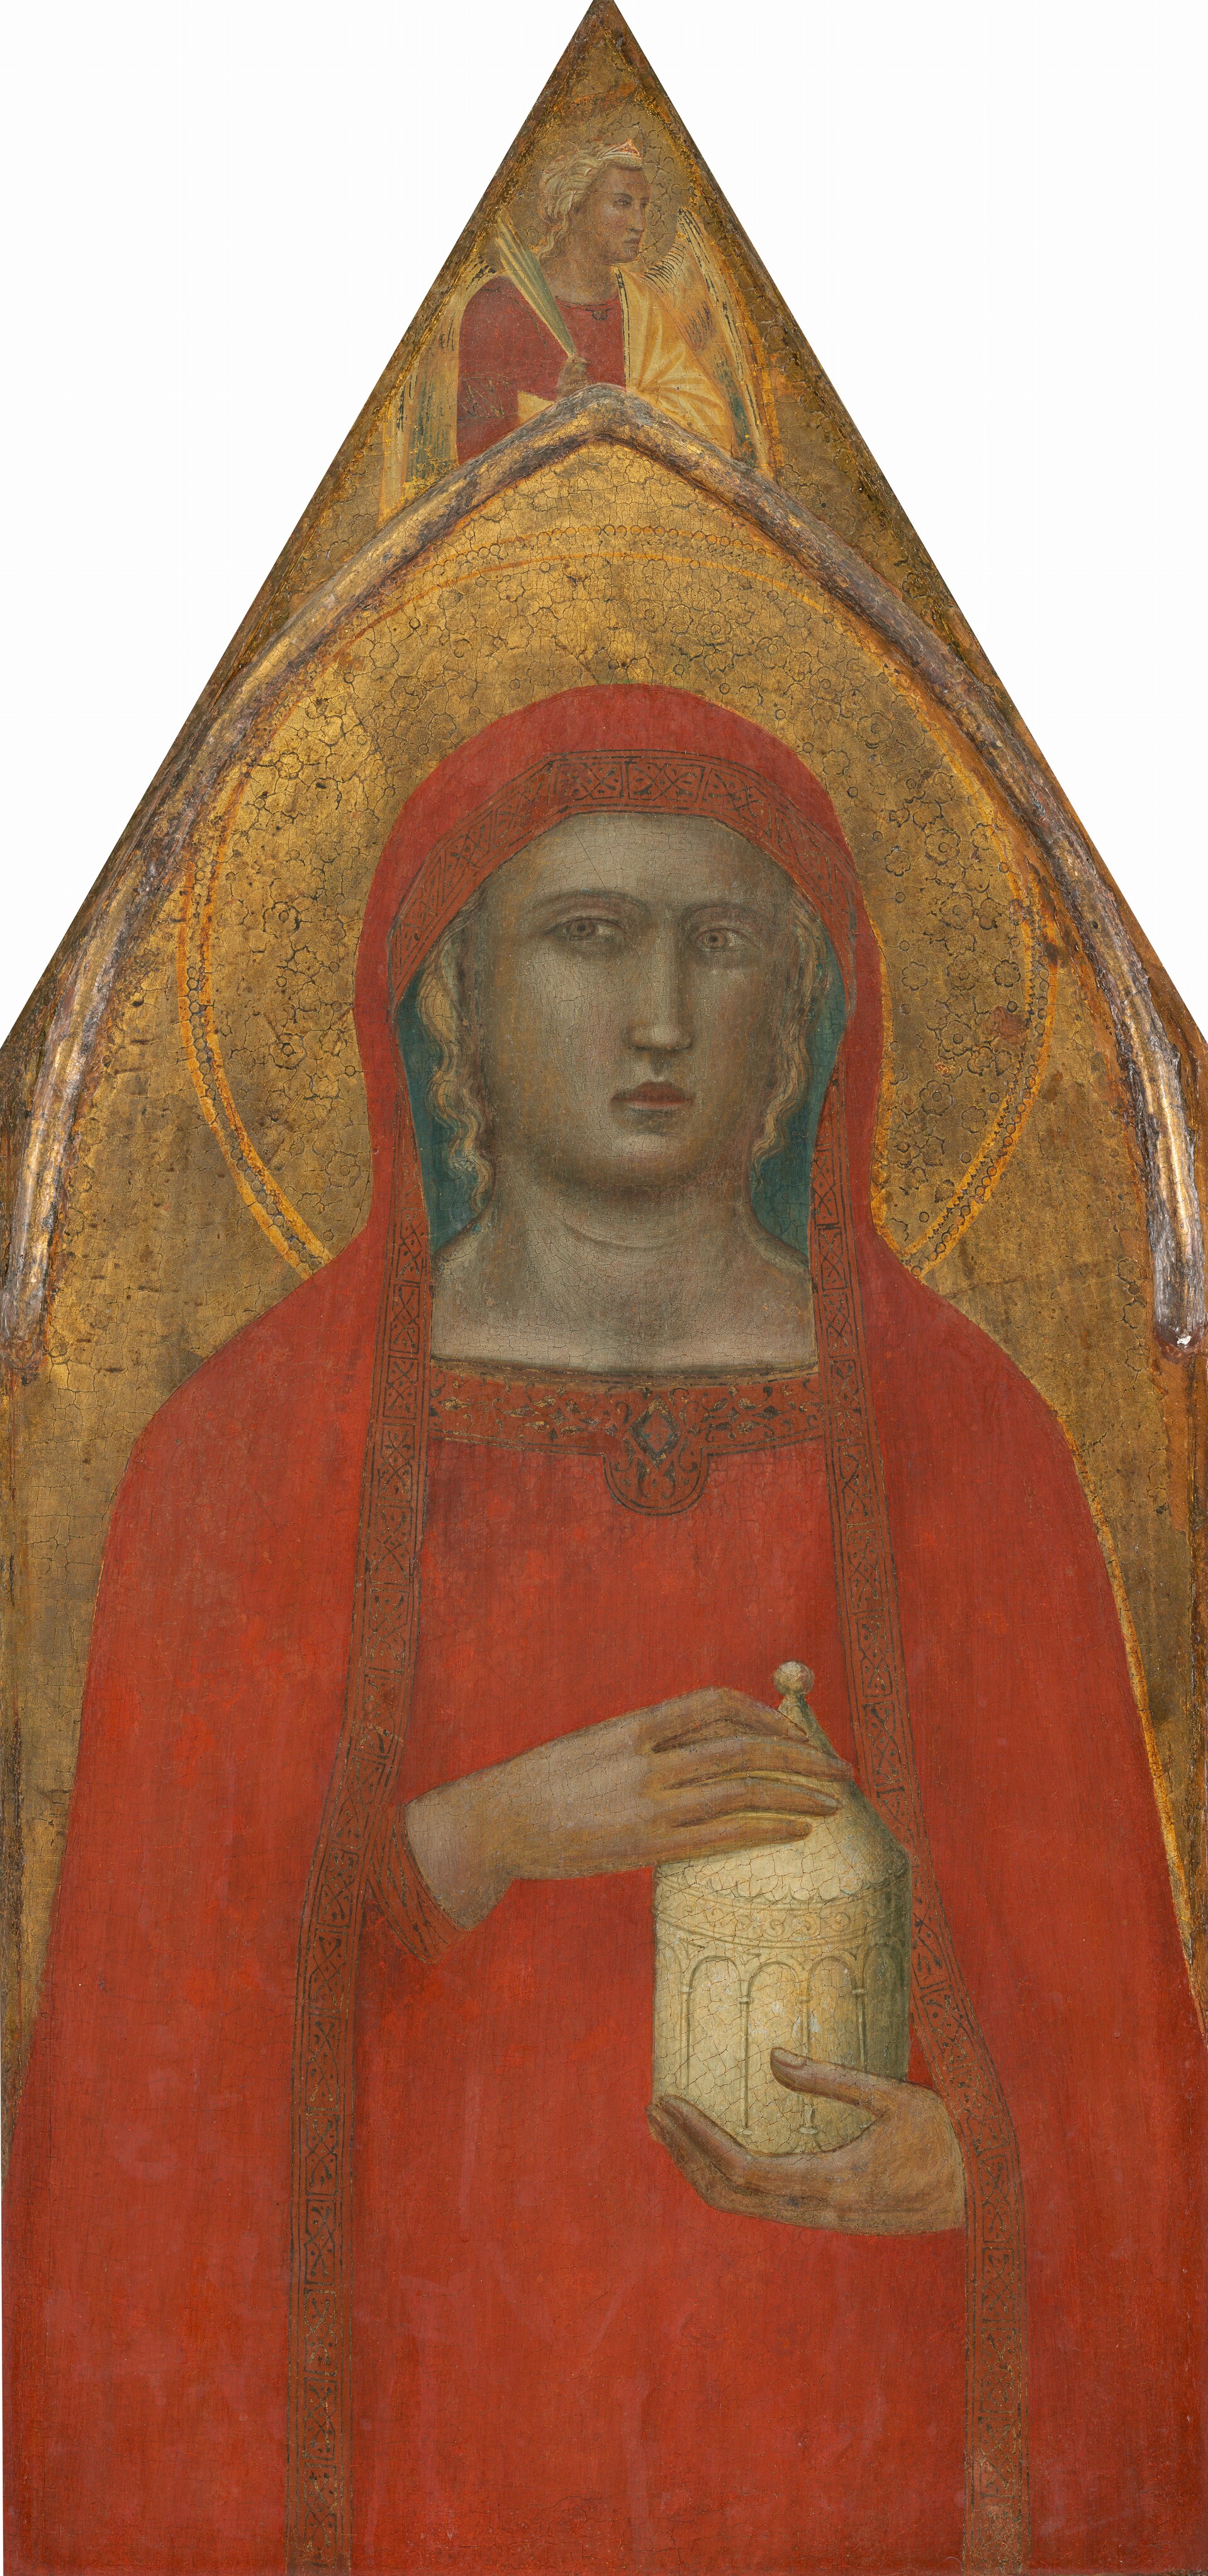 Middle Ages in Pistoia, for the first time a major exhibition on medieval  art in the